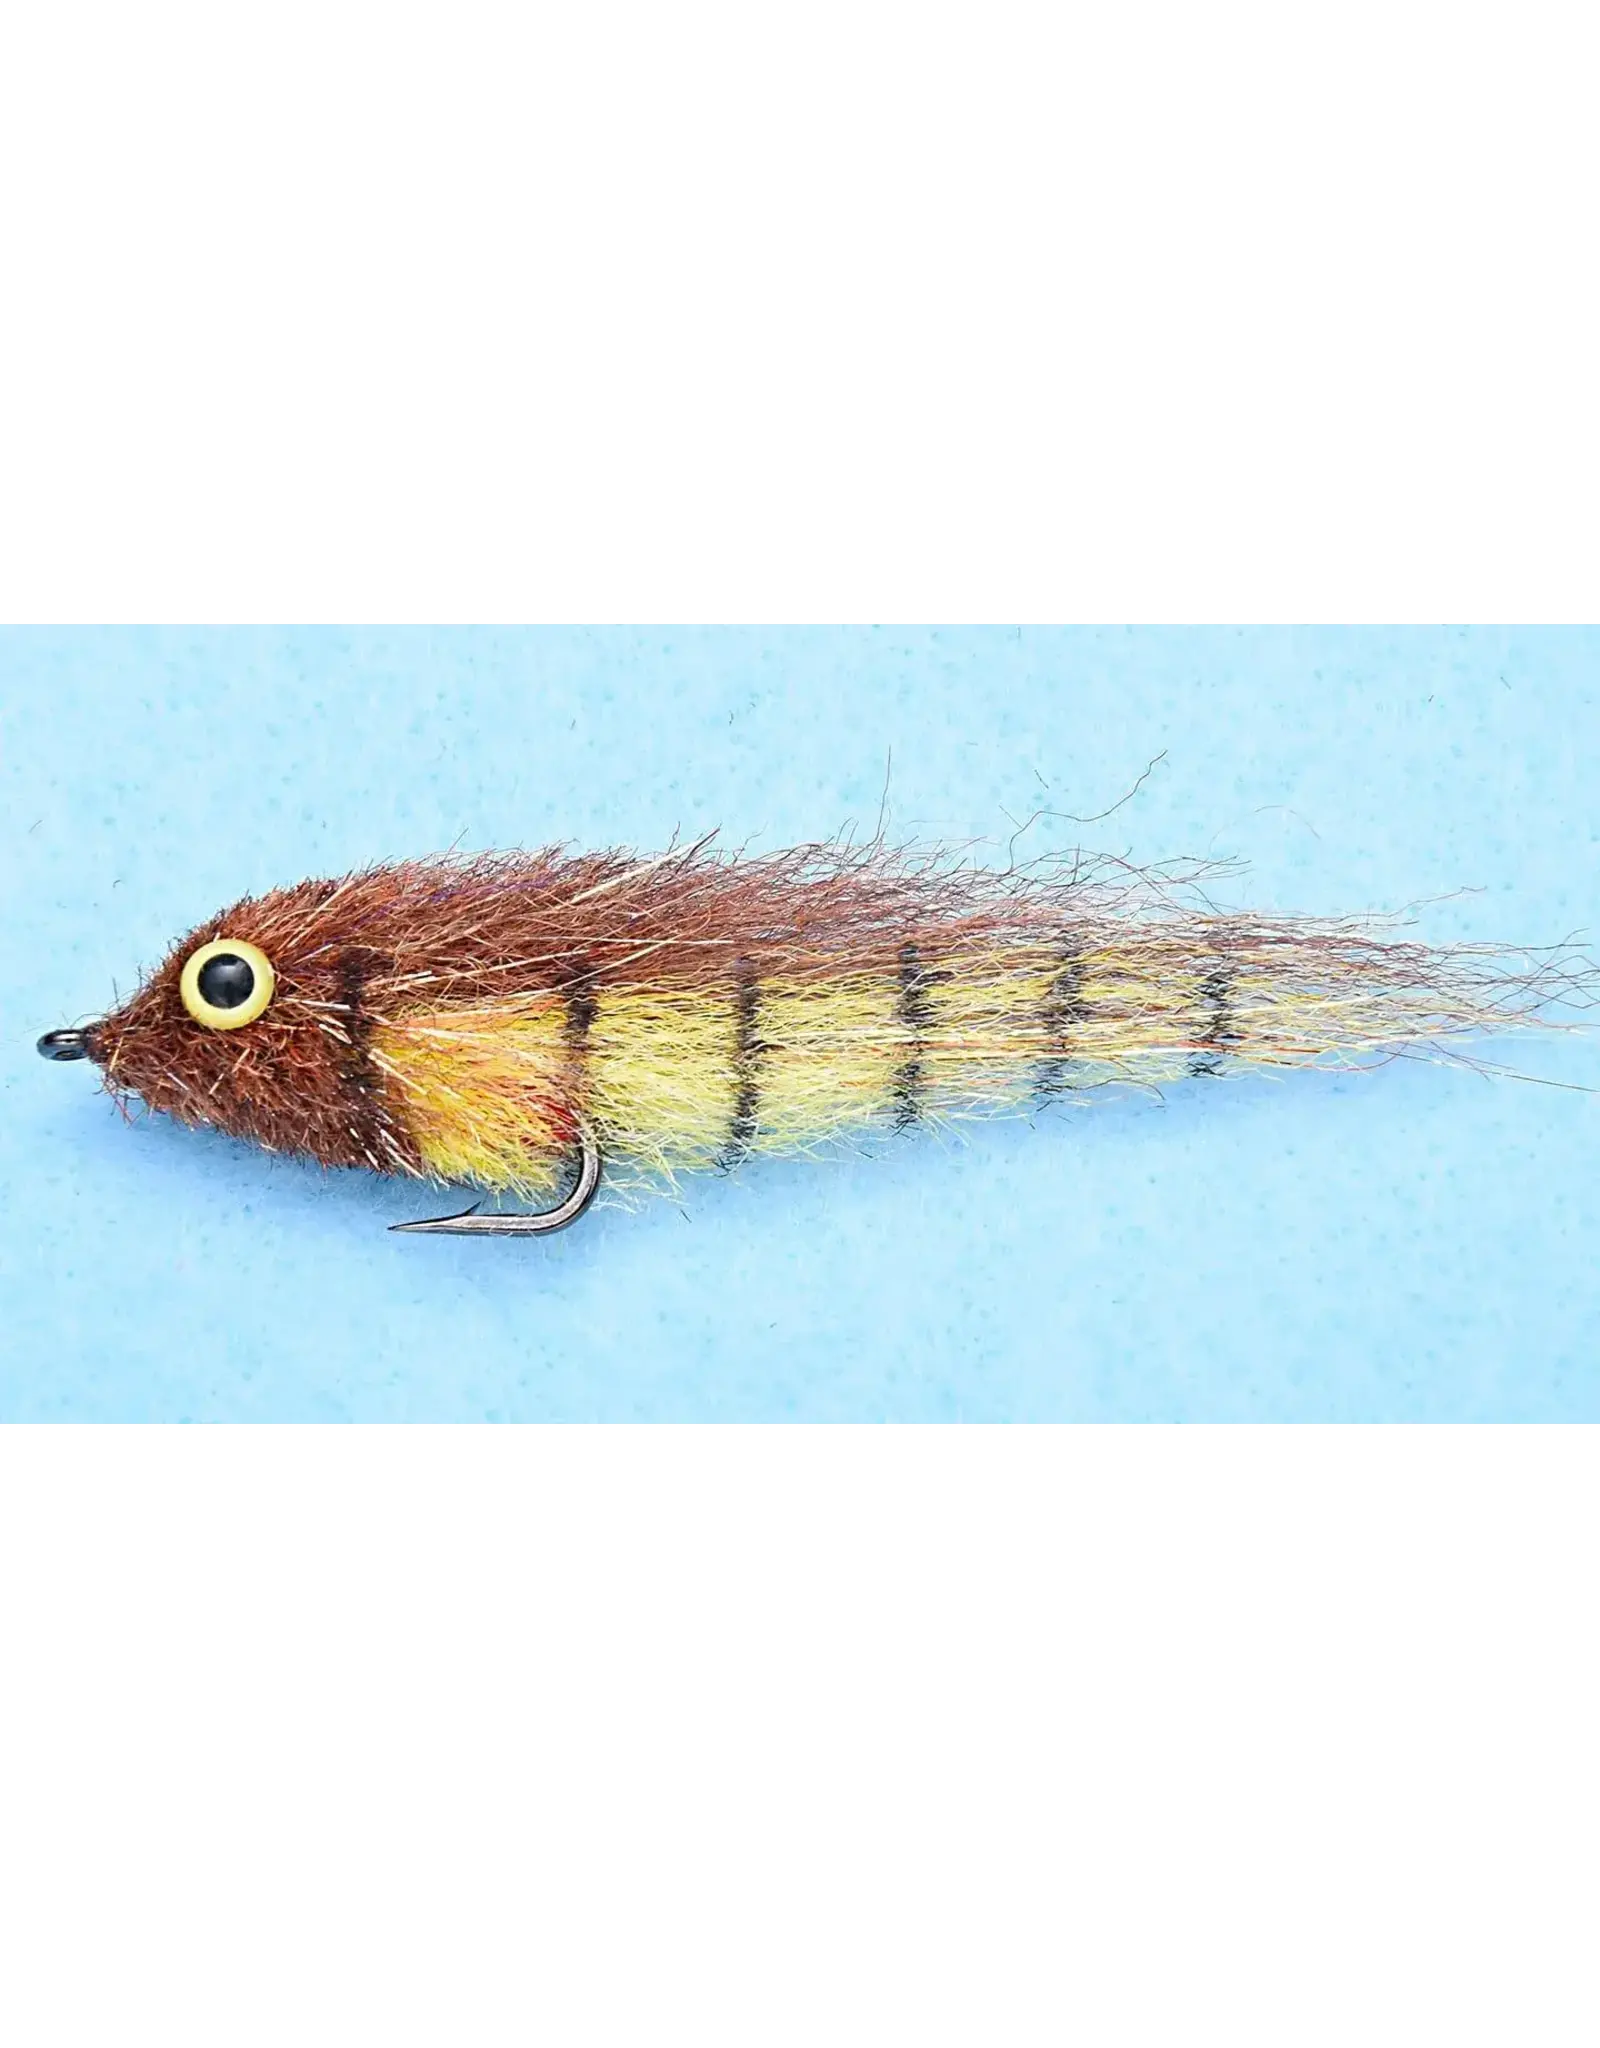 ENRICO PUGLISI LITTLE MINNOW SHADED BROWN LY #4